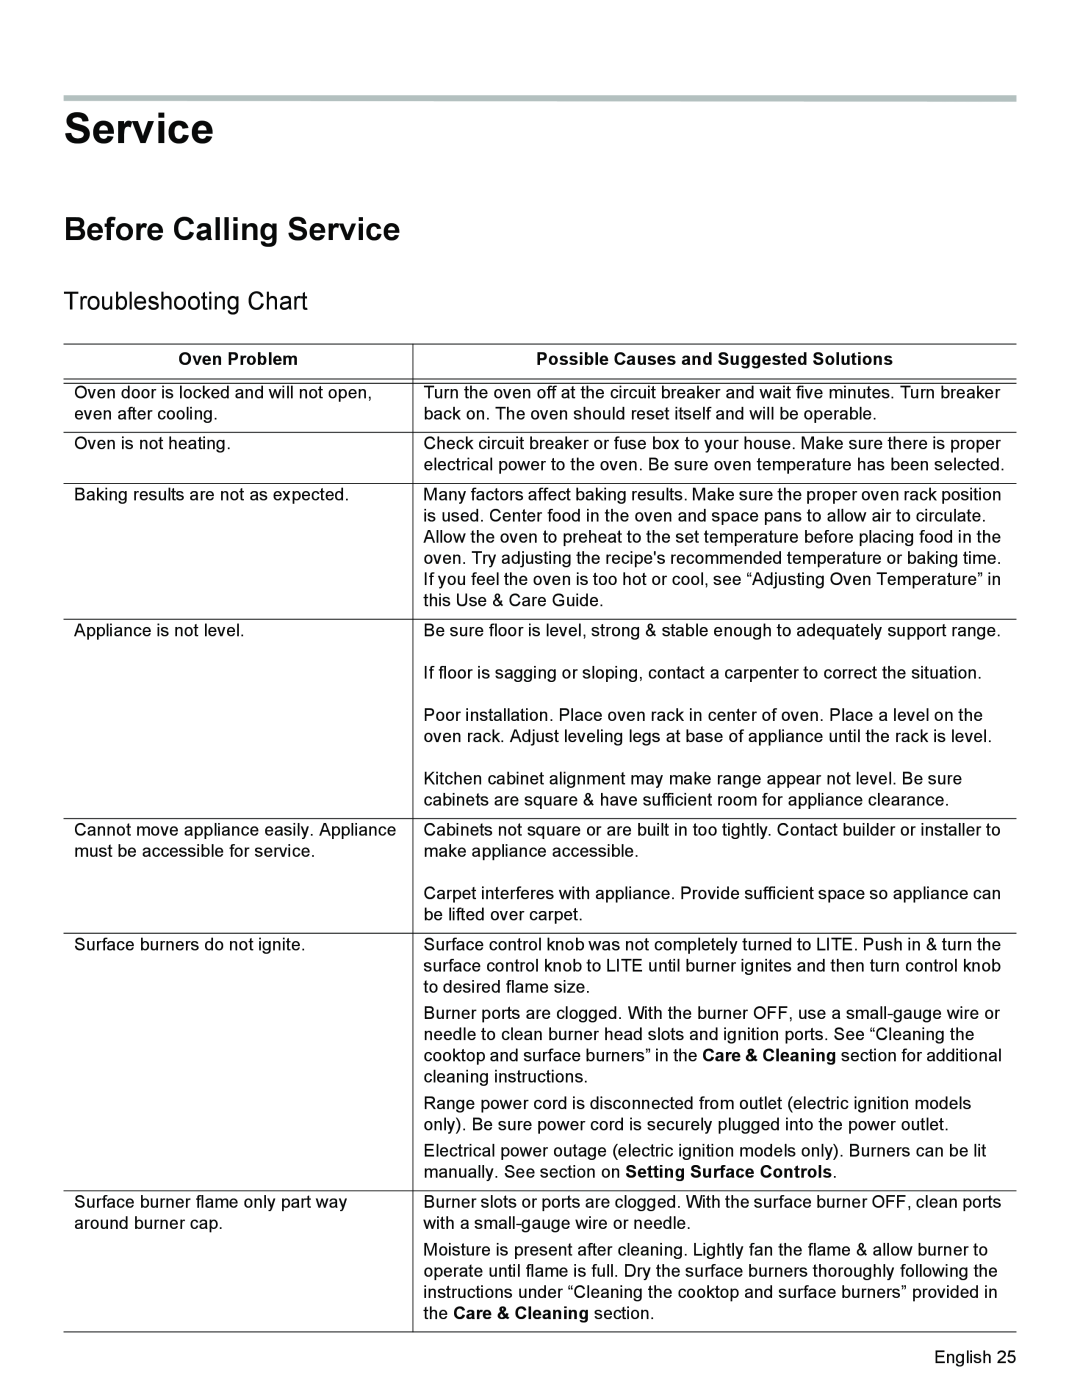 Bosch Appliances HGS3023UC Before Calling Service, Troubleshooting Chart, Oven Problem, the Care & Cleaning section 